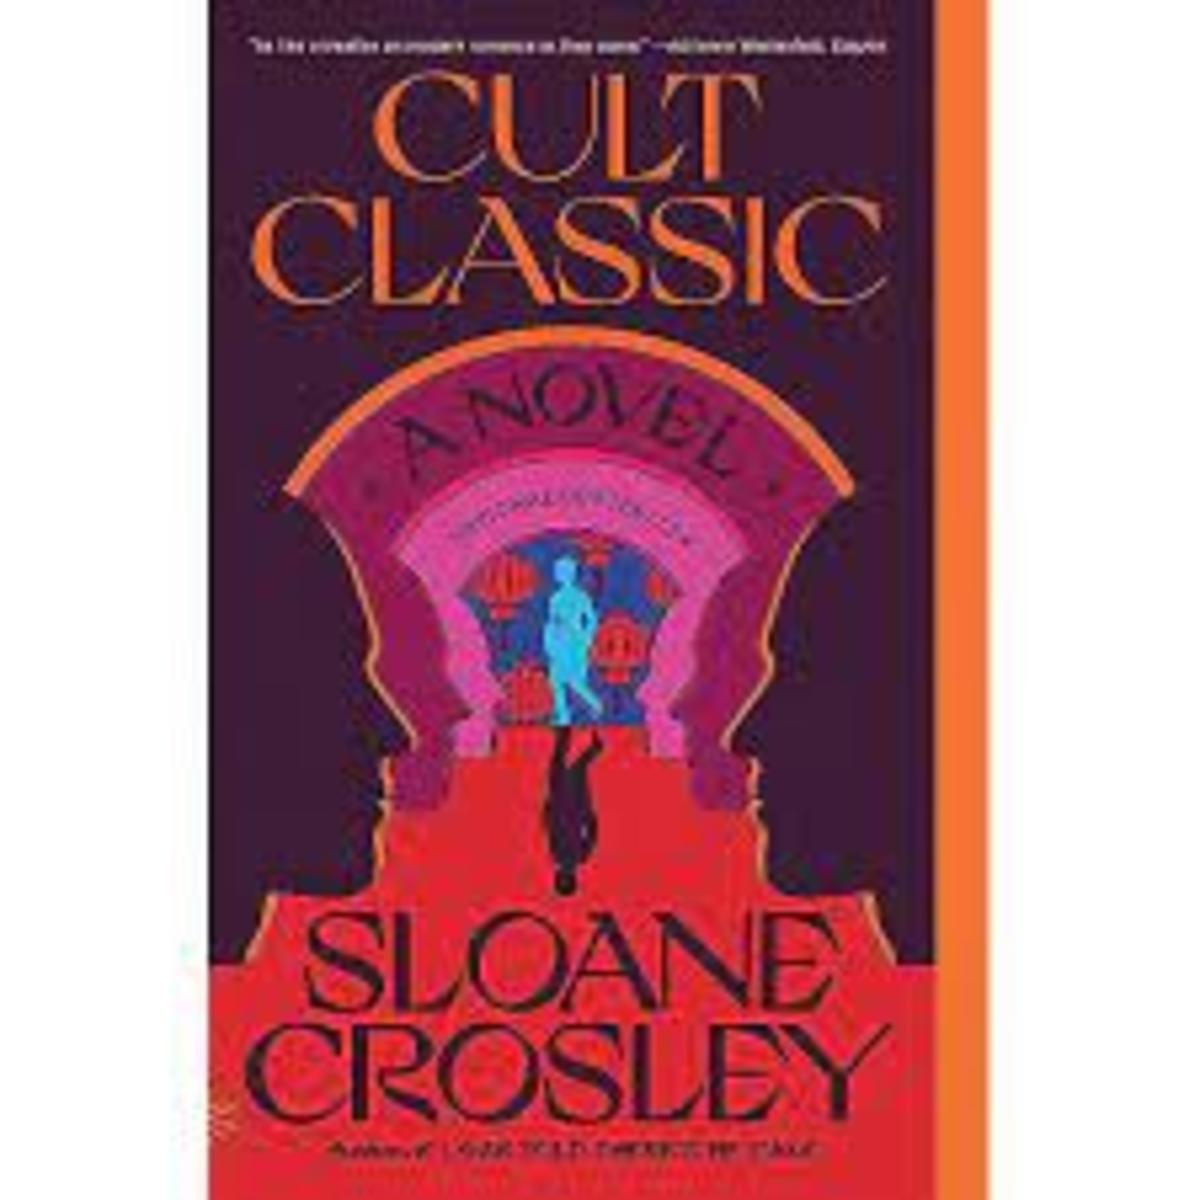 Book Review on “Cult Classic” by Sloane Crosley